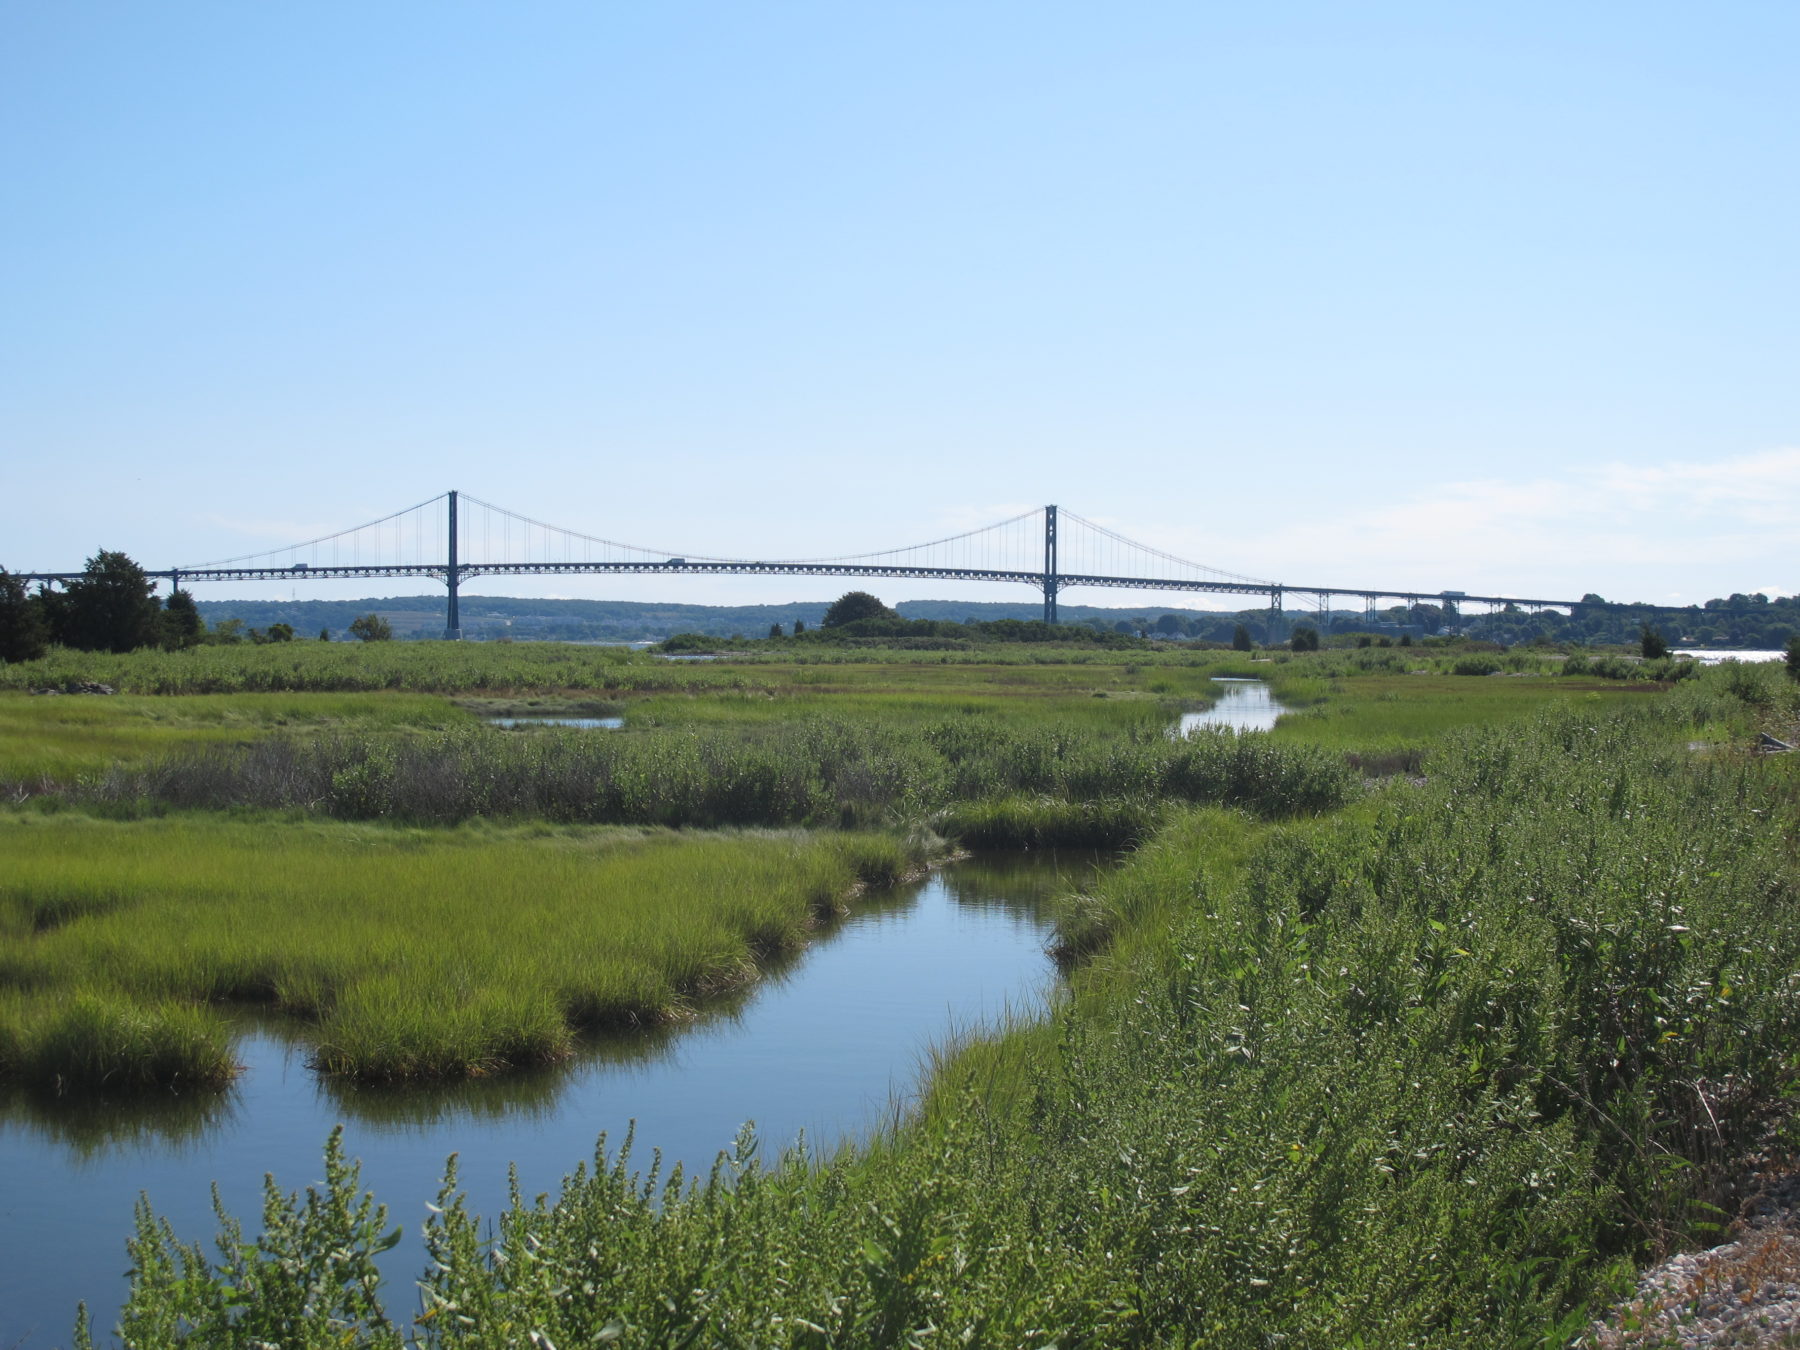 Salt marshes and other coastal buffers offer a natural barrier protecting Narragansett Bay from human activity.